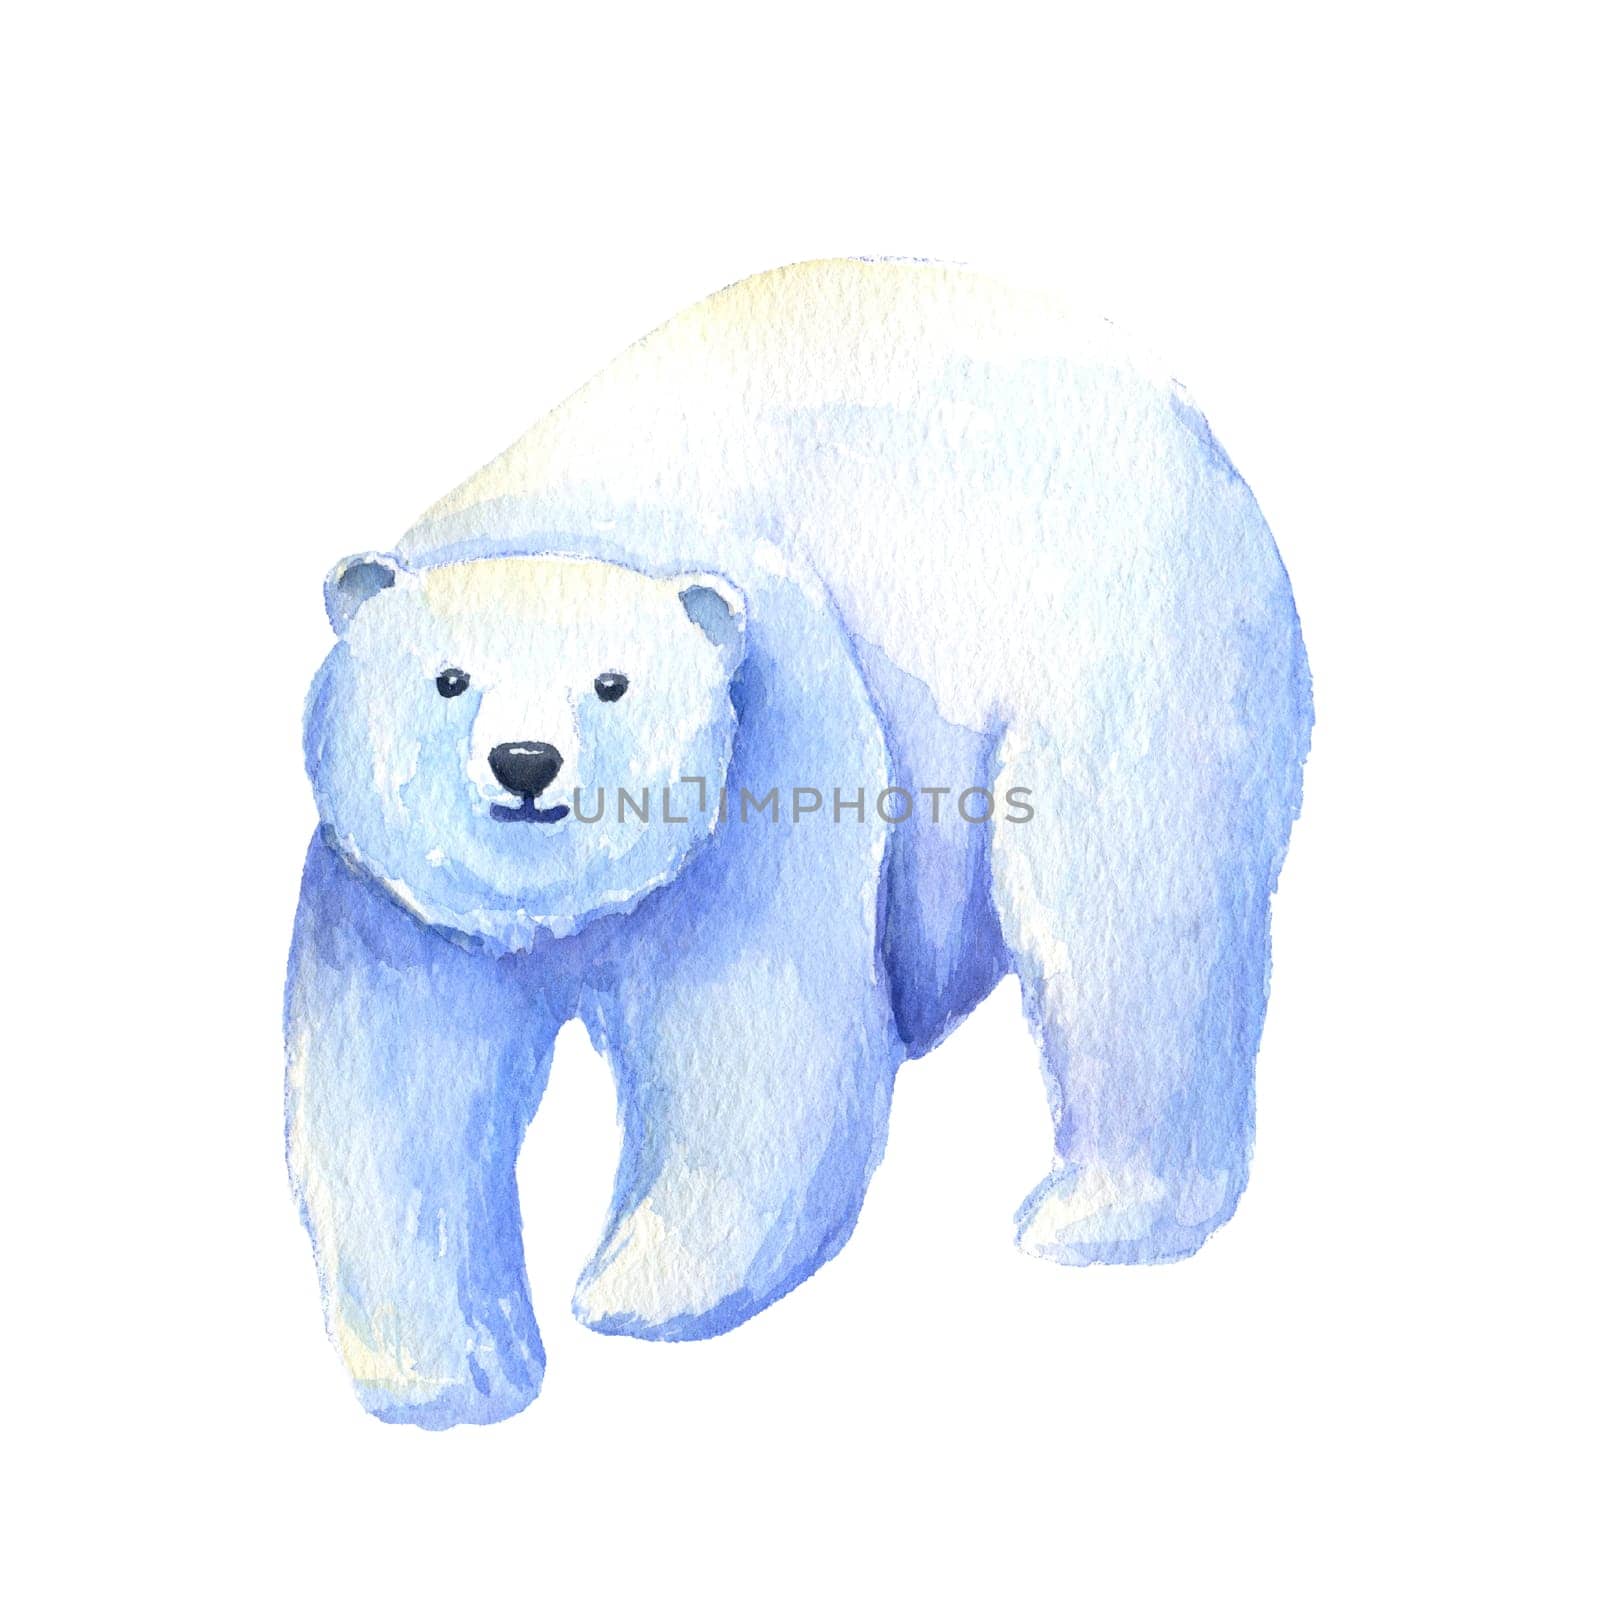 Adult polar bear. Watercolor hand drawn illustration isolated on white. North animal.